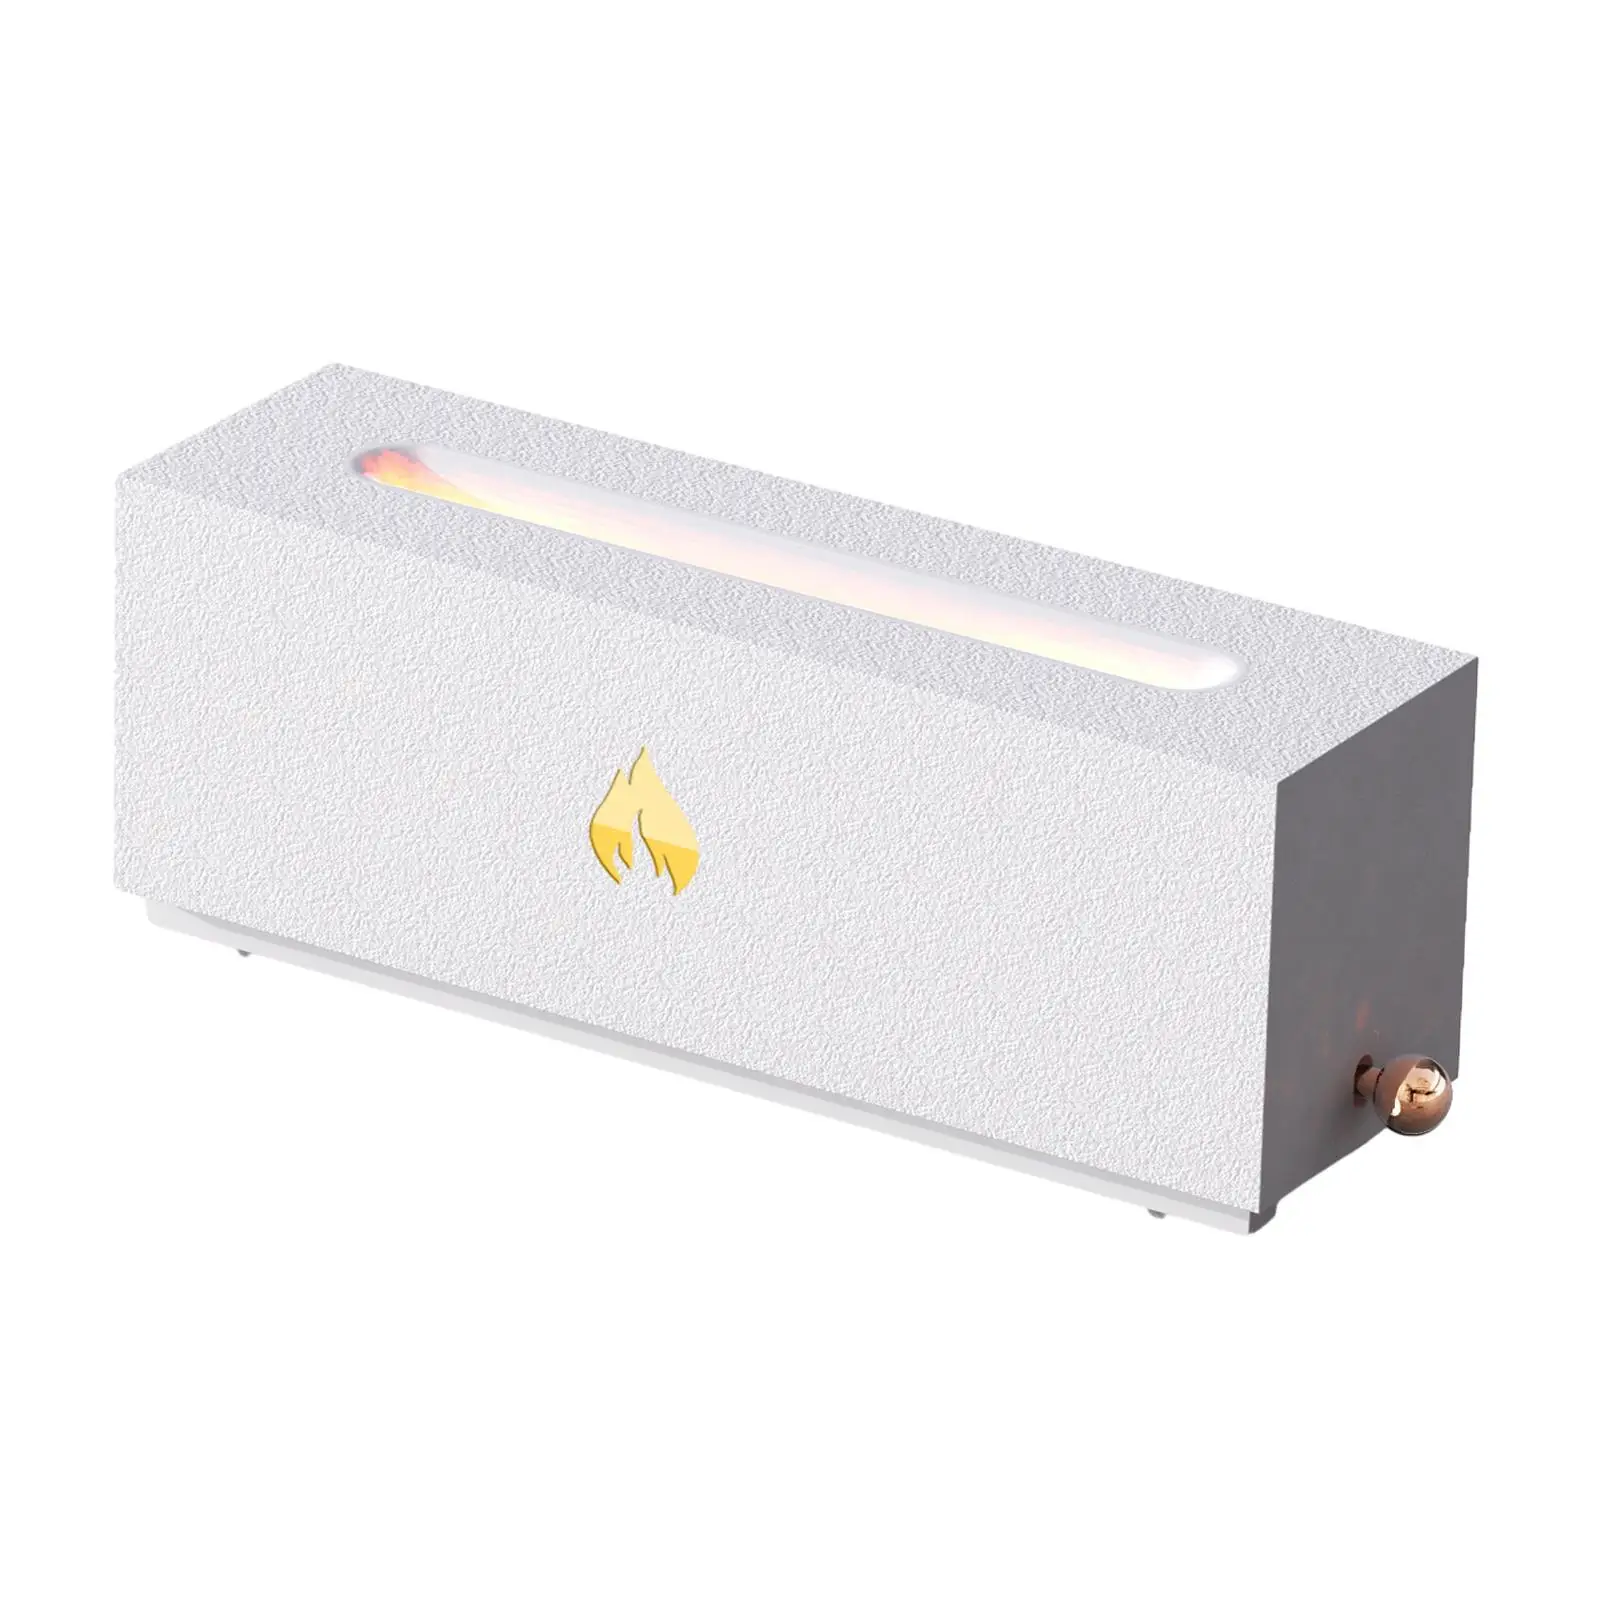 Fragrance Diffuser Fashion 3 Light Modes USB Diffuser for Office Gym Bedroom